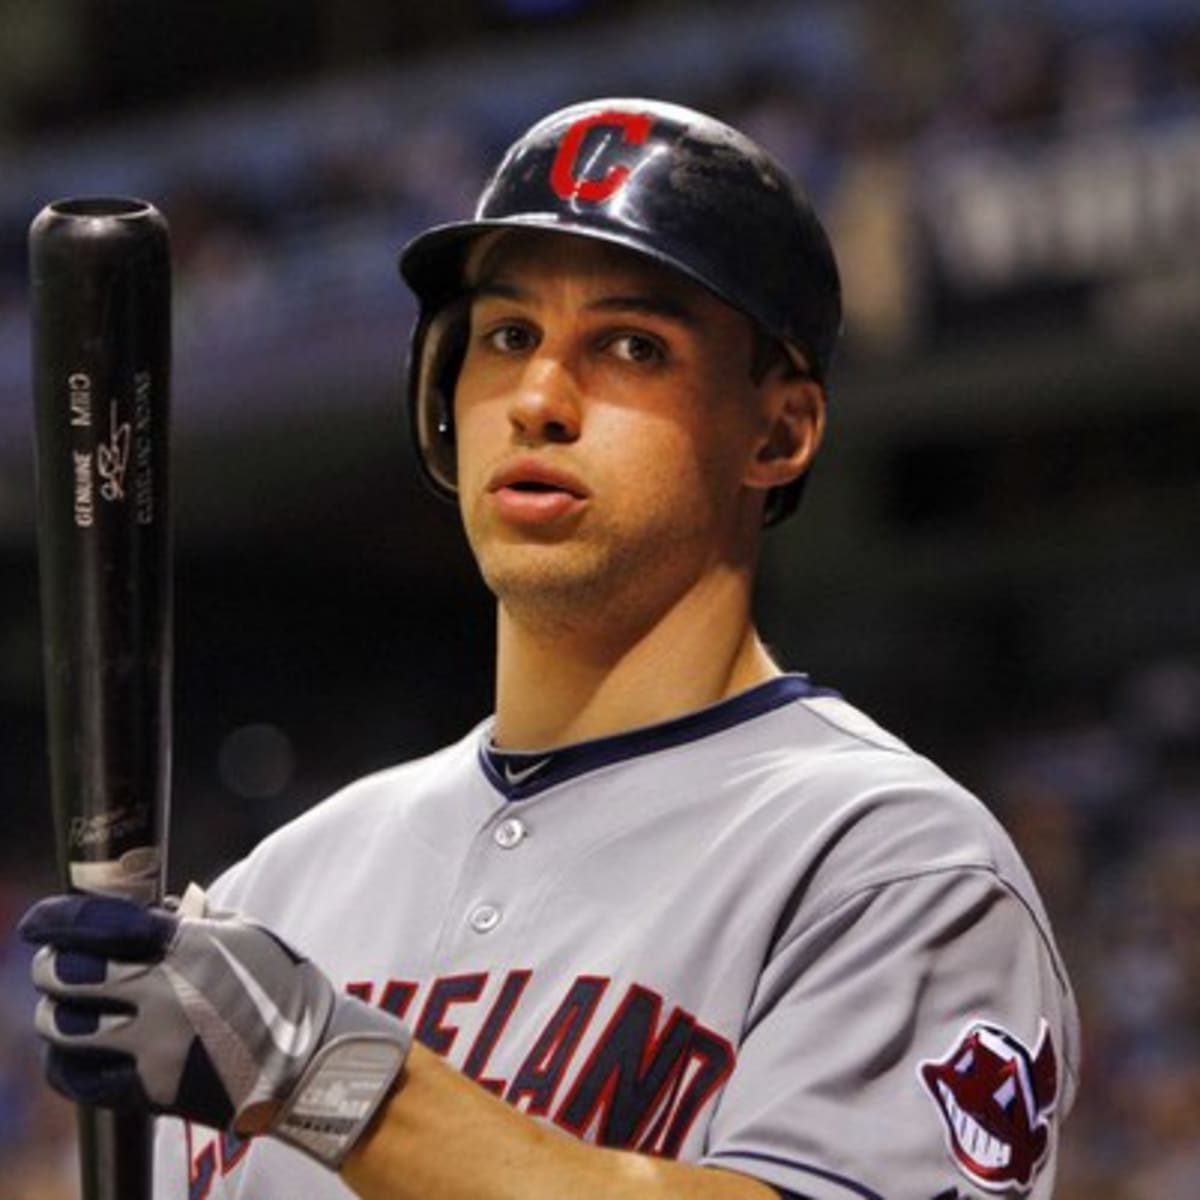 Grady Sizemore to start in CF for Red Sox